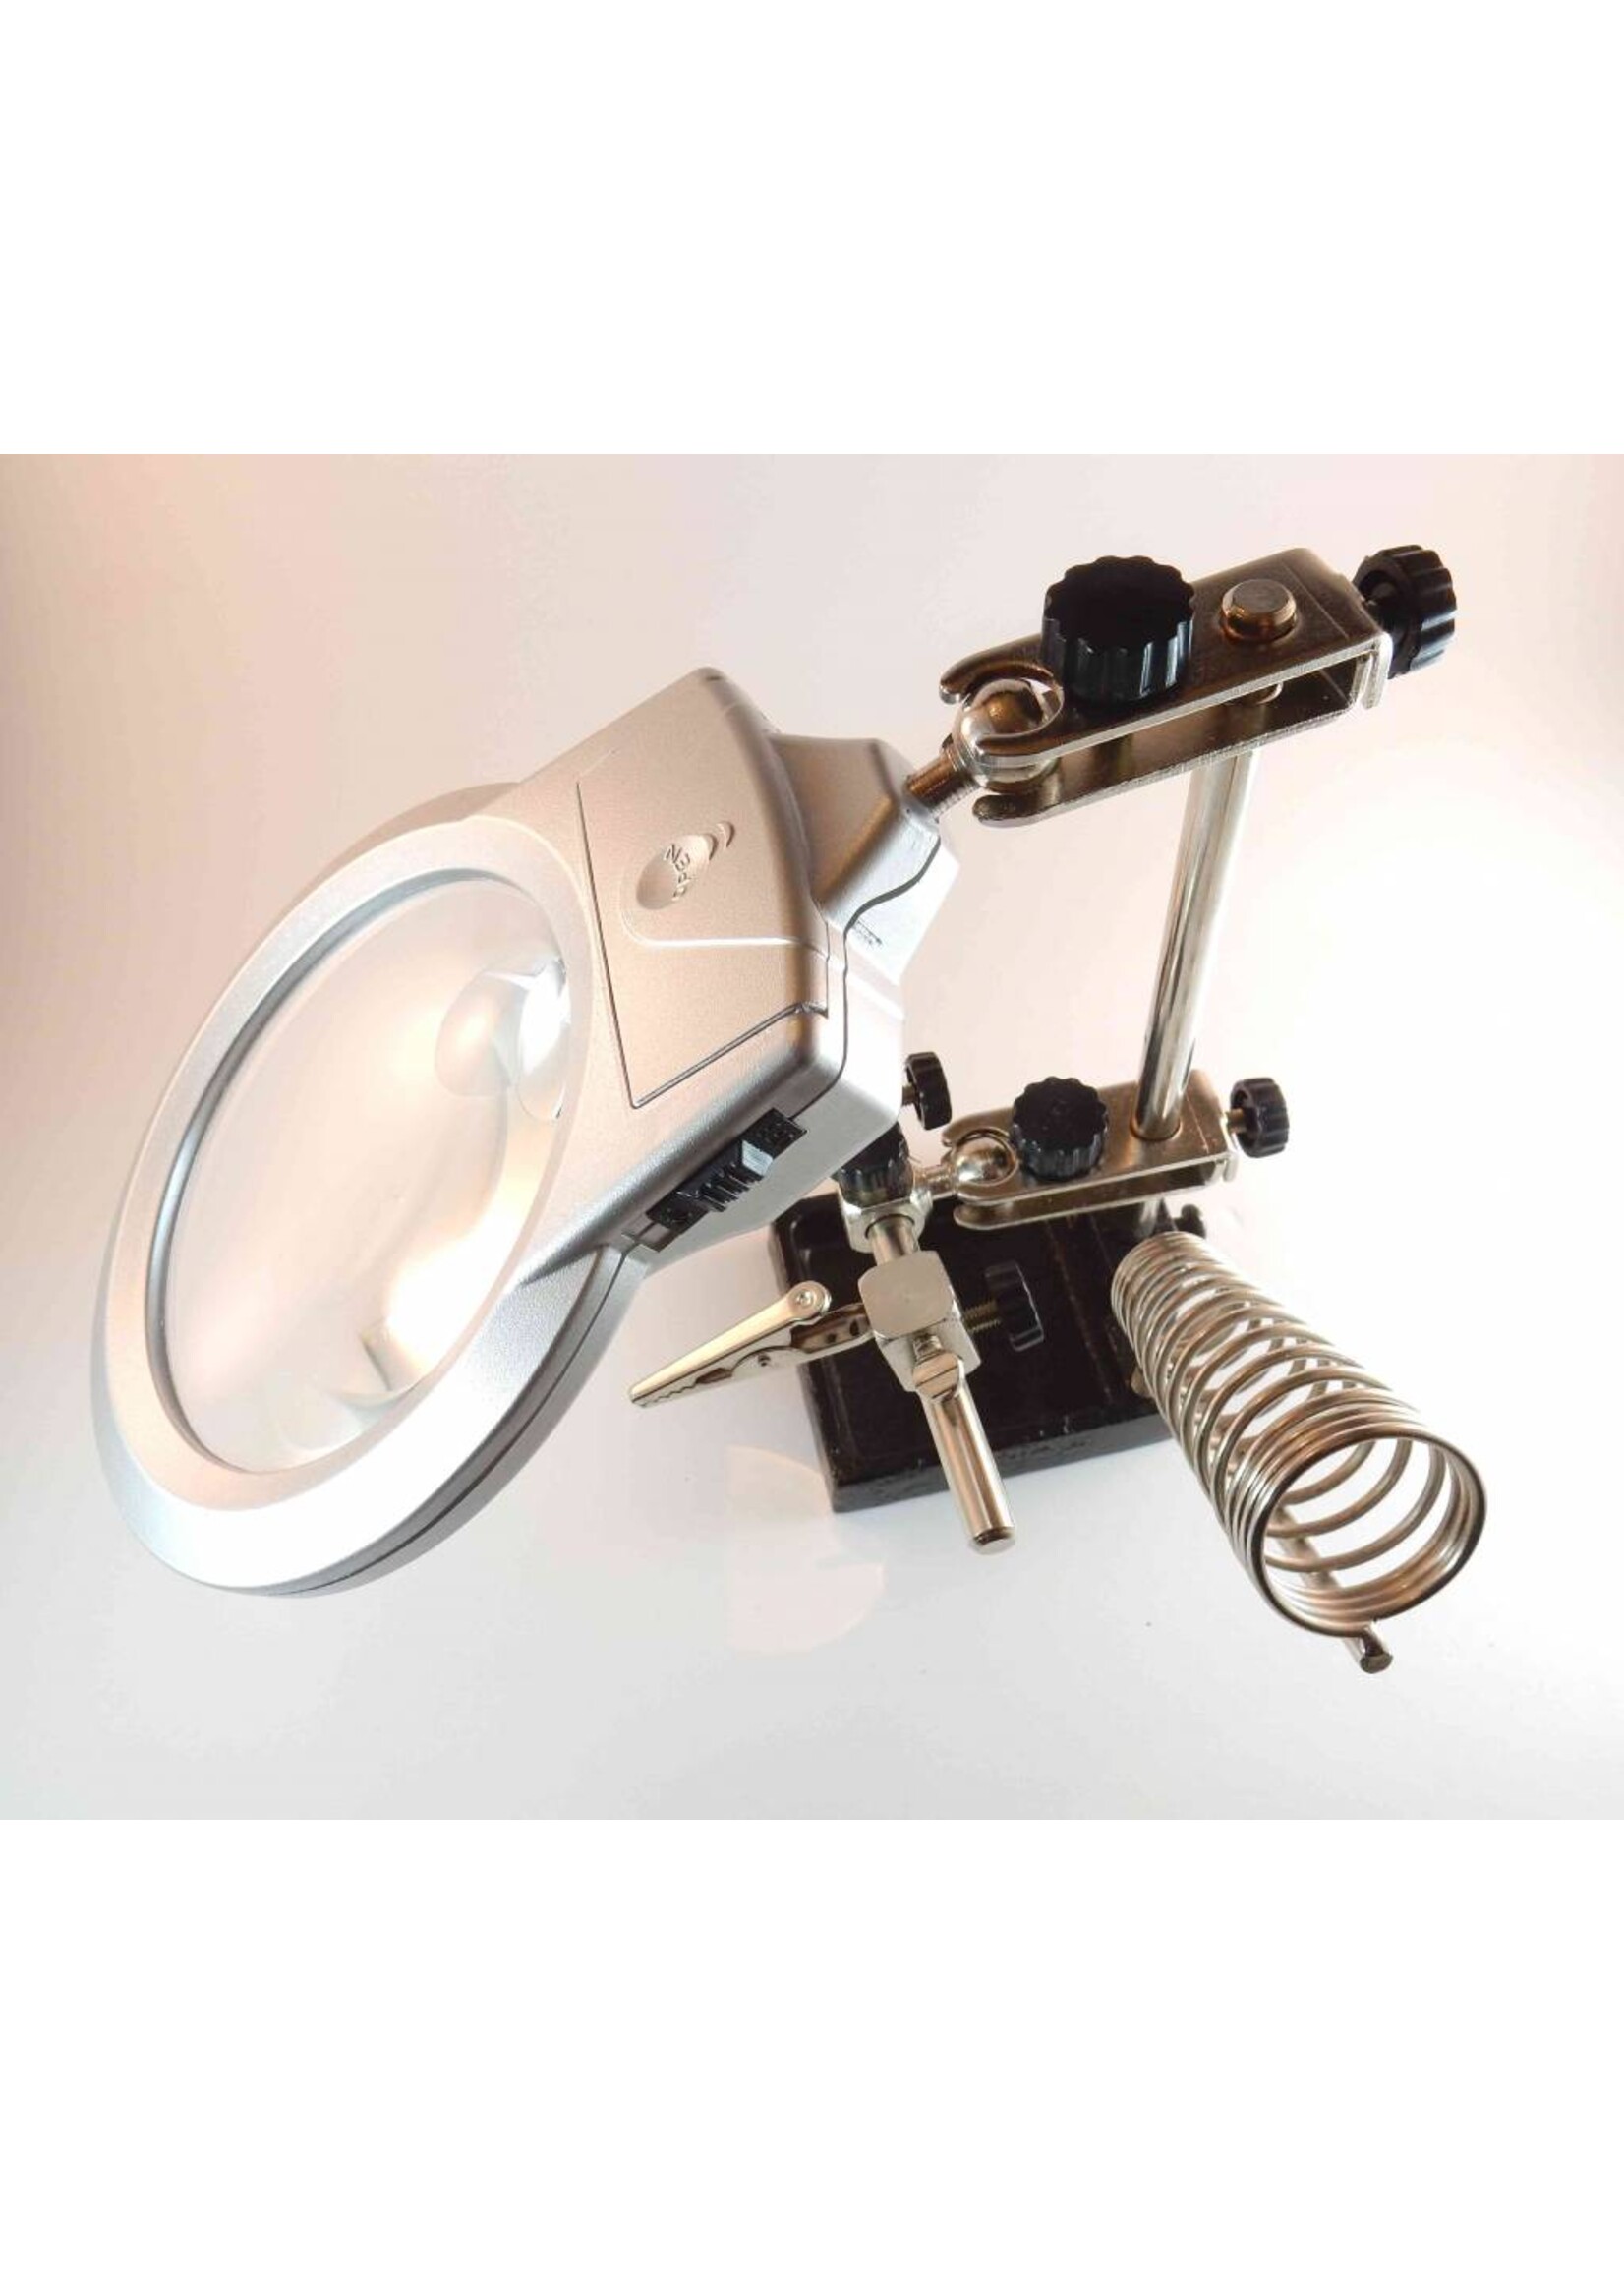 Third hand base with magnifier 90mm LED